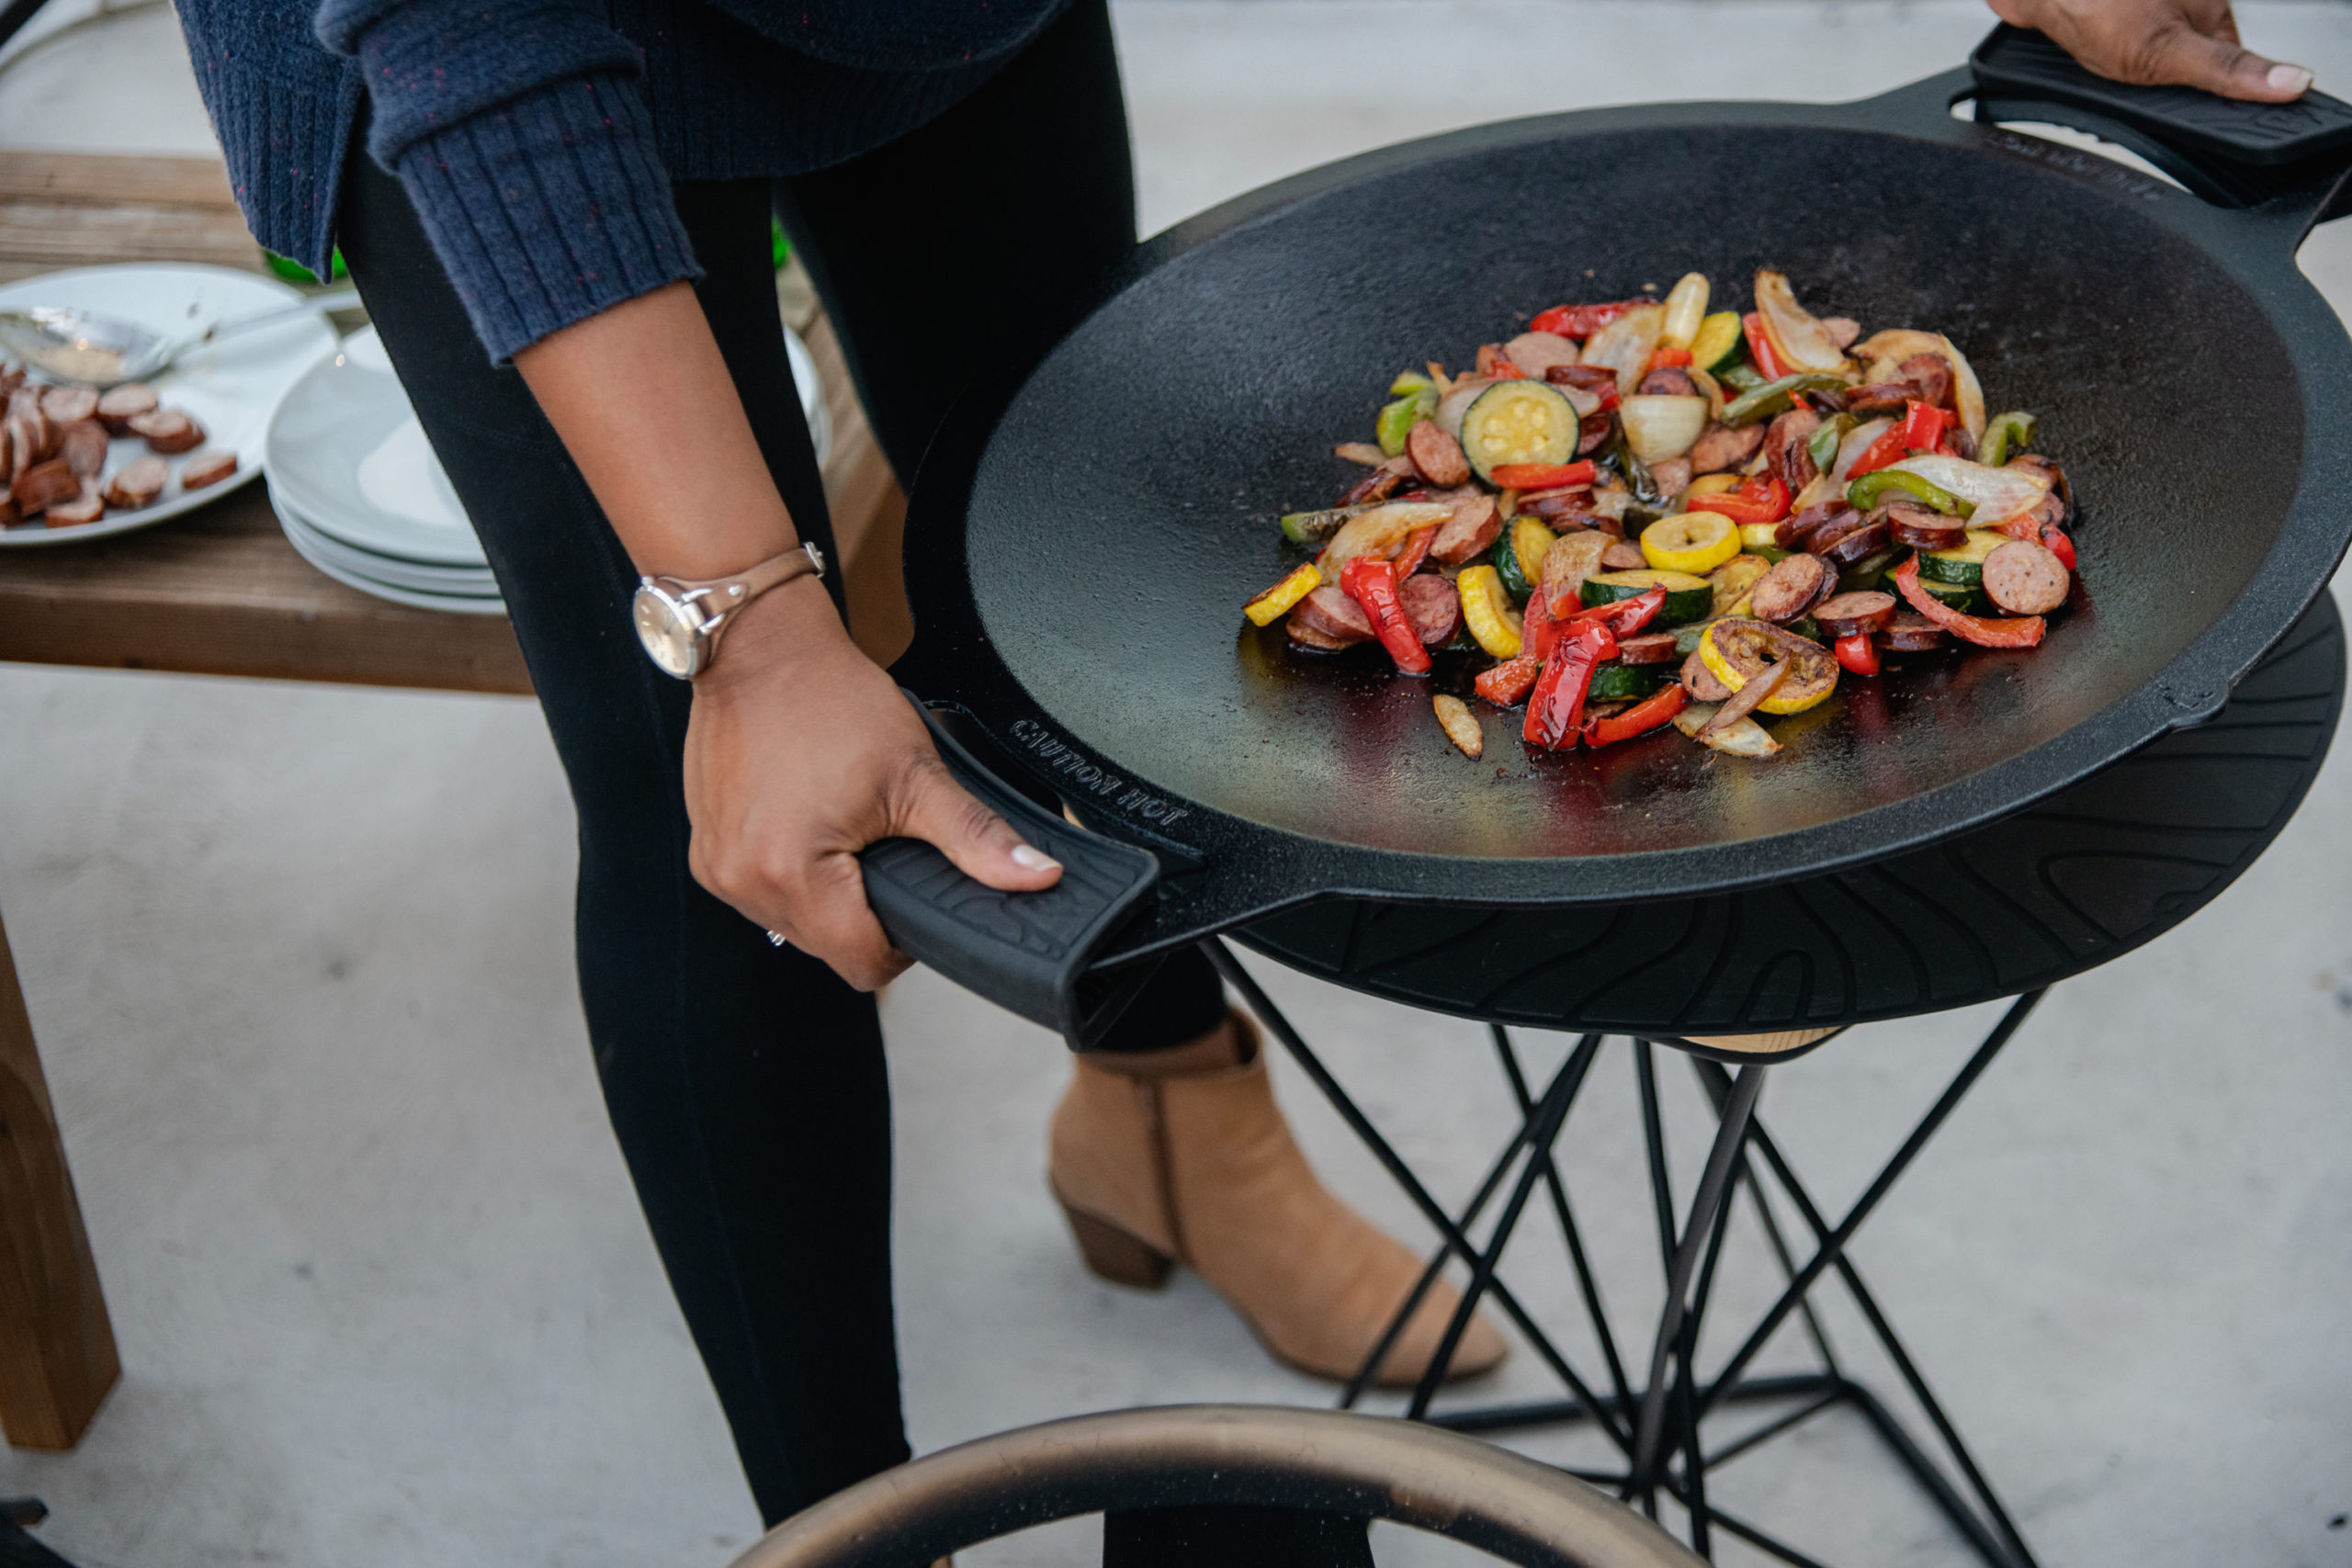 The Solo Stove Grill is Discontinued - CookOut News